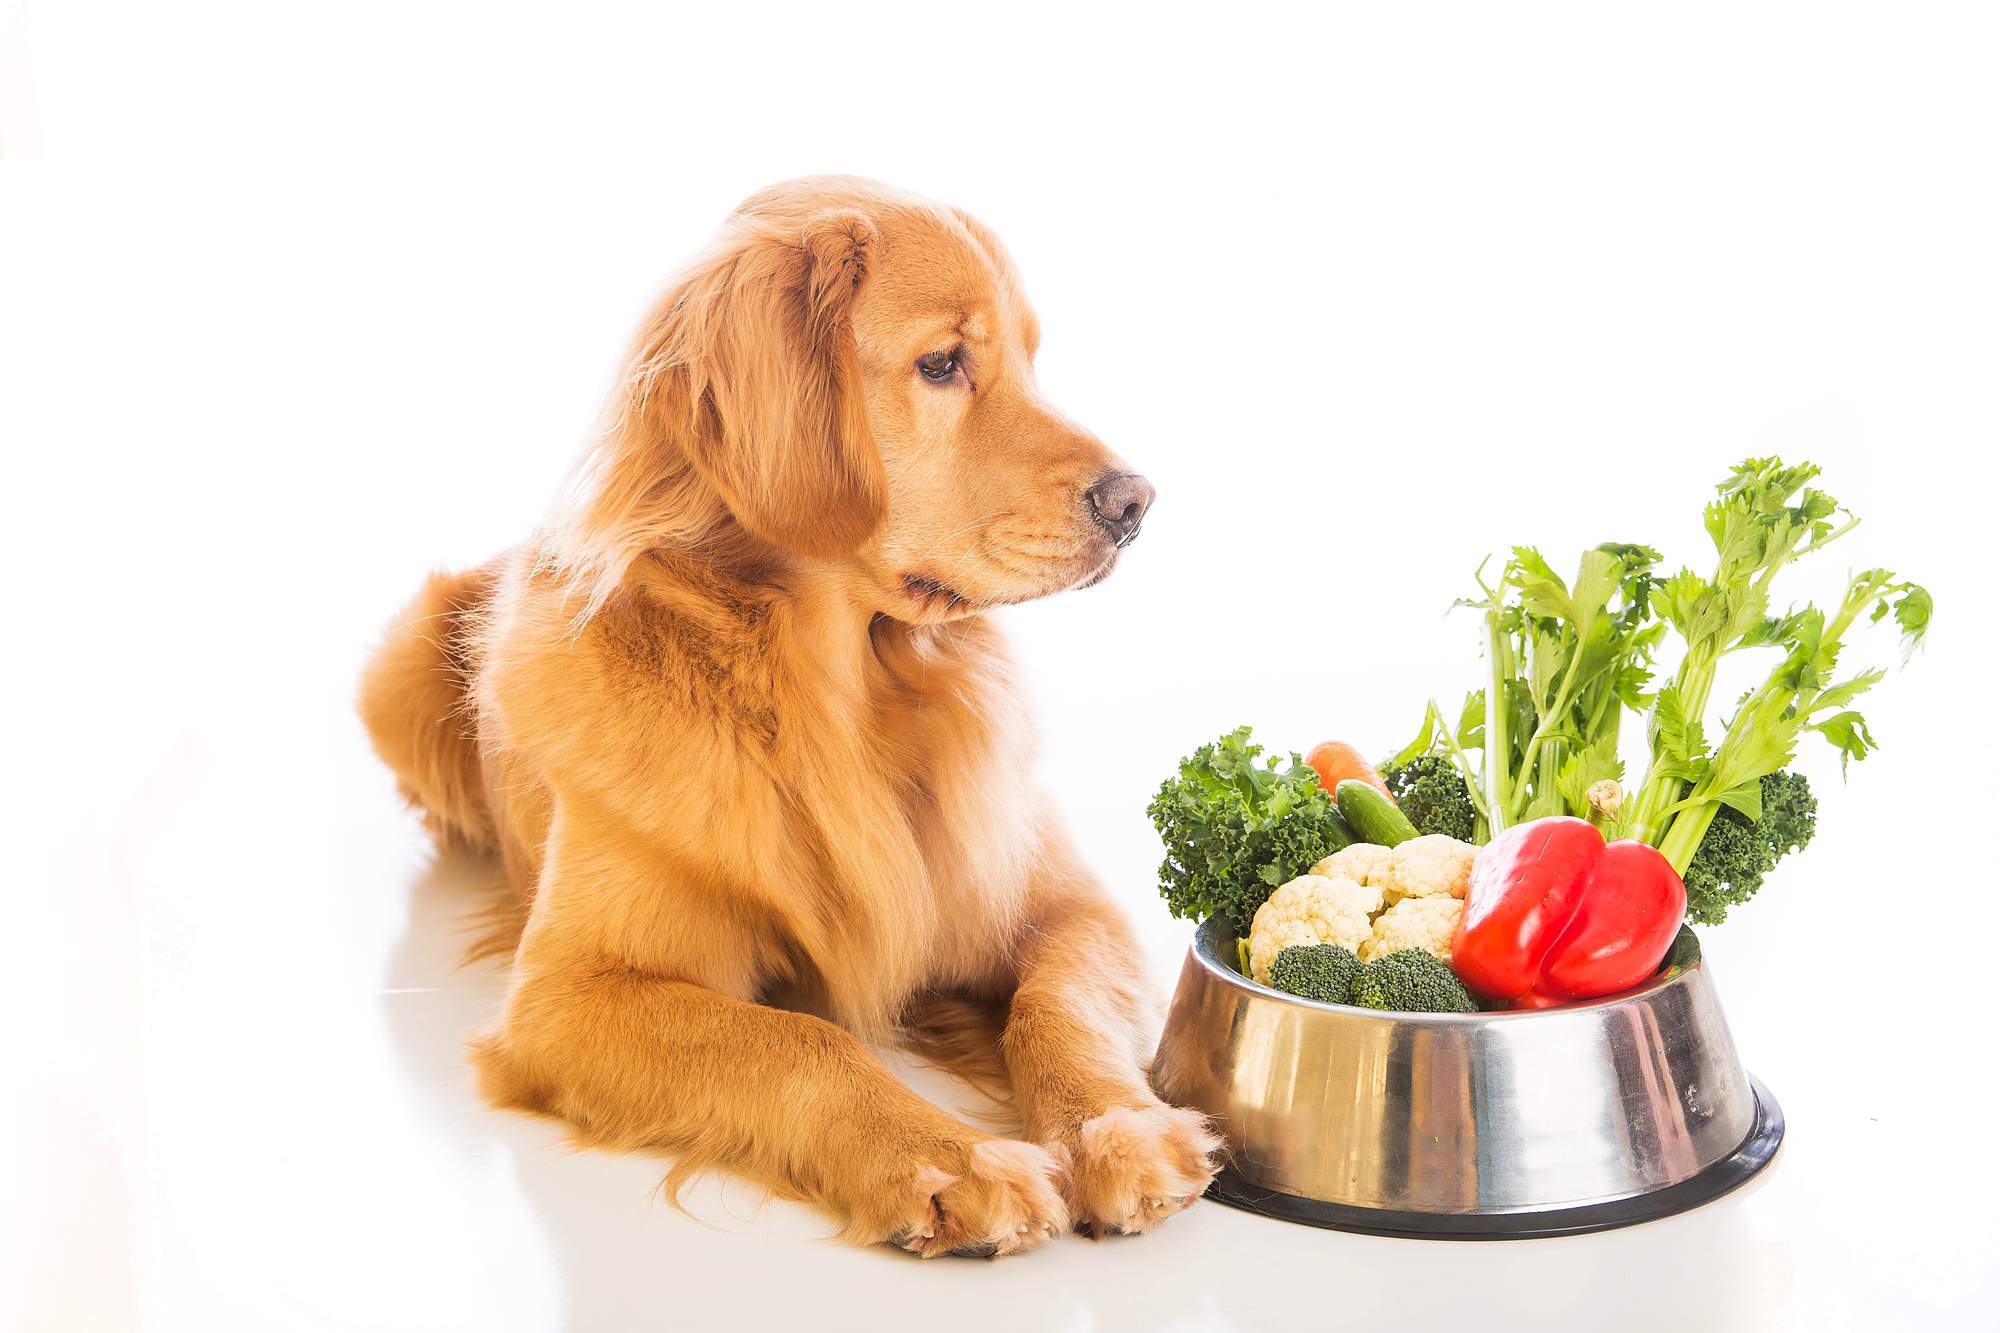 Types of Dog Food: 5 Tips for Finding the Best Brand for You